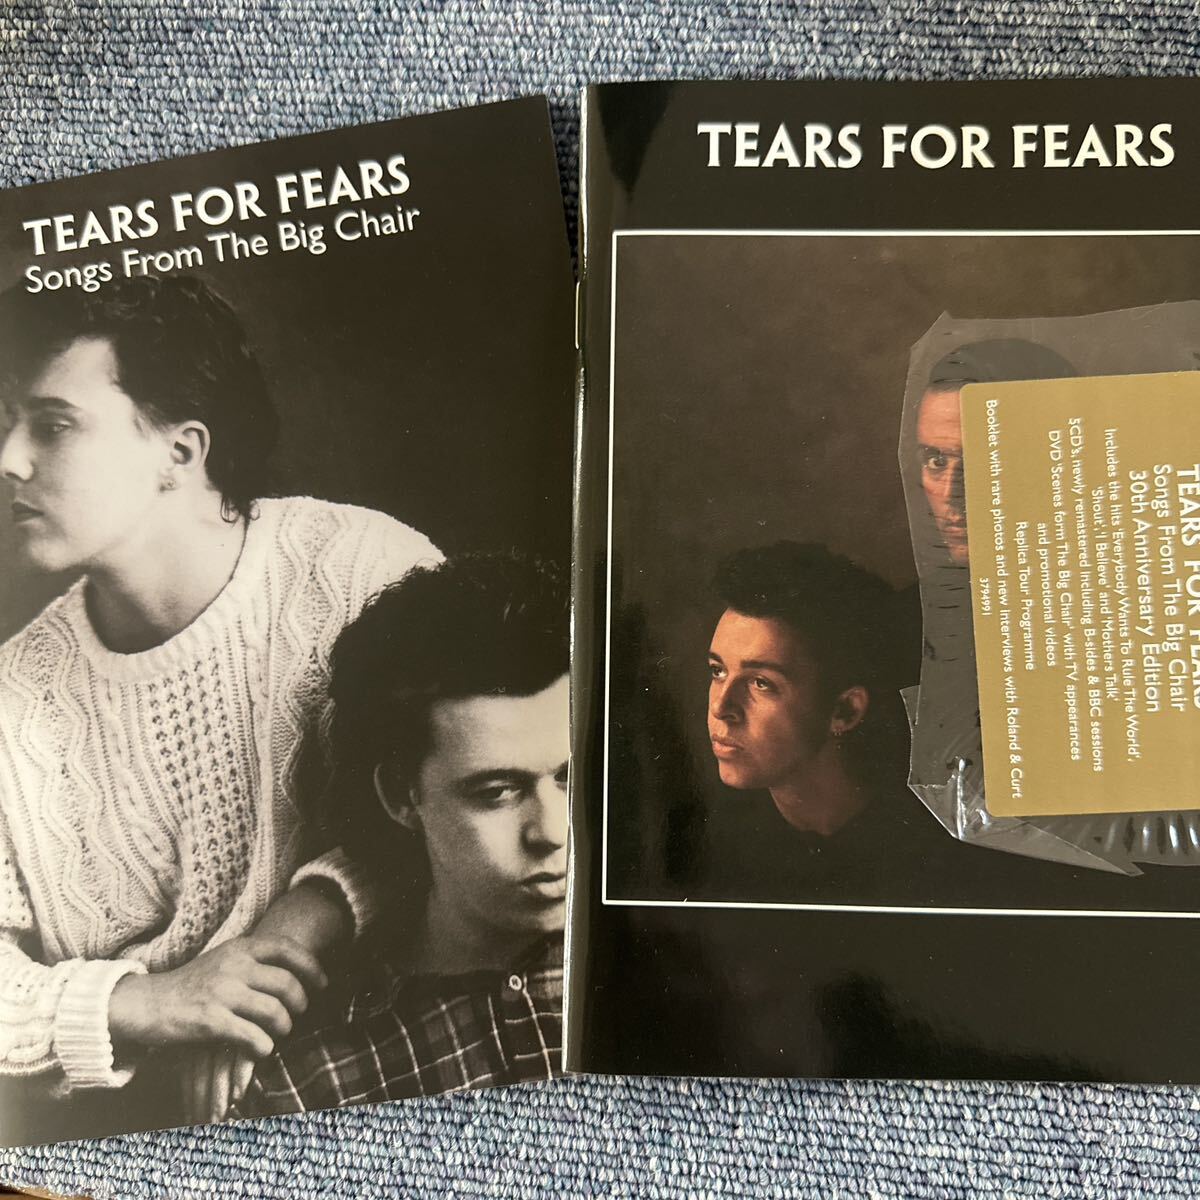 TEARS FOR FEARS SONGS FROM THE BIG CHAIR 6枚組　BOX 美品入手困難_画像3